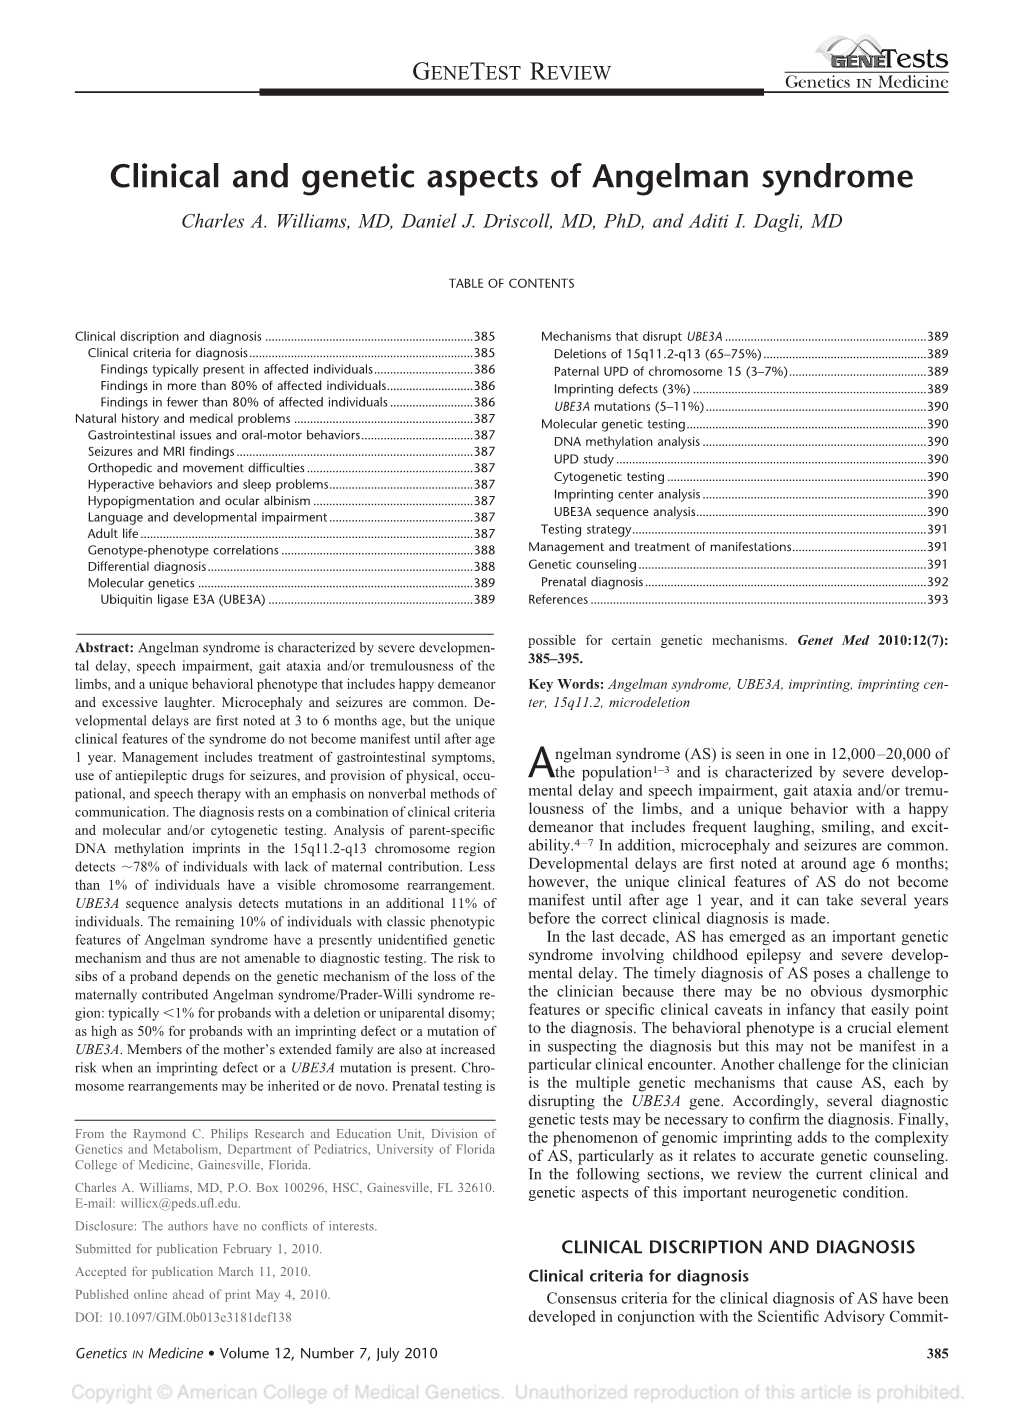 Clinical and Genetic Aspects of Angelman Syndrome Charles A